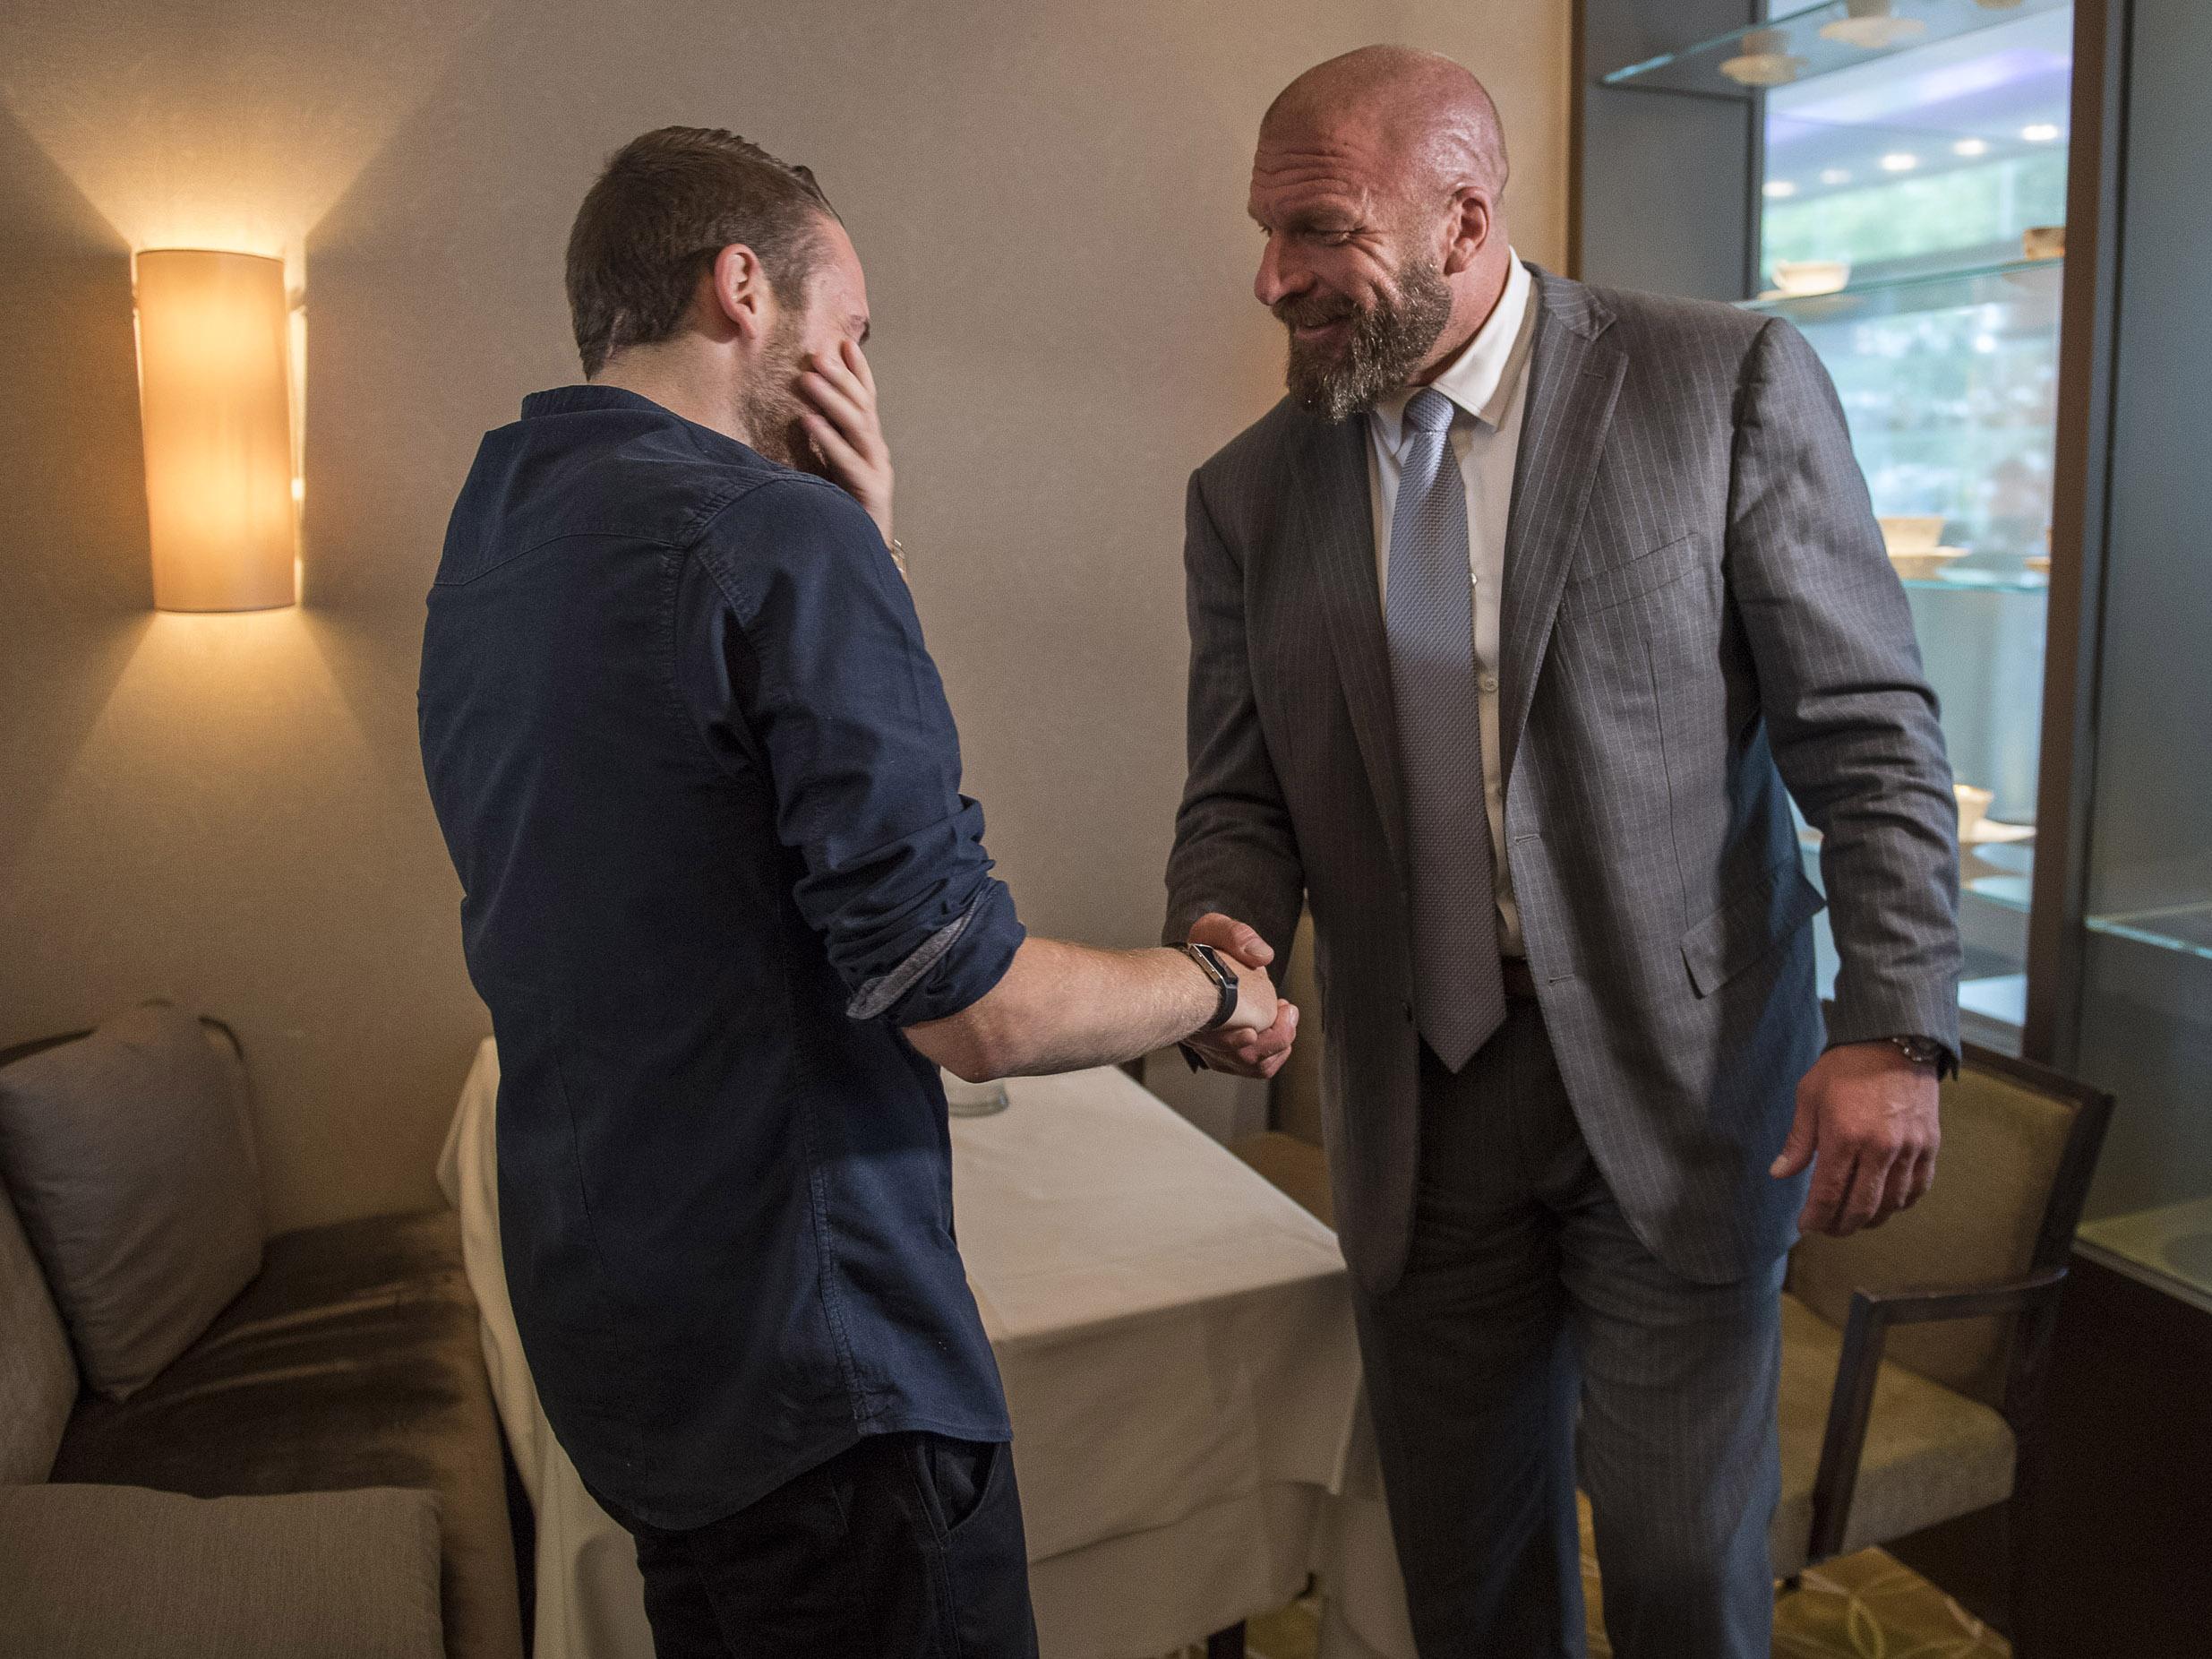 'It was an absolute pleasure to meet one of the greatest [WWE] superstars ever,' Guenigault said